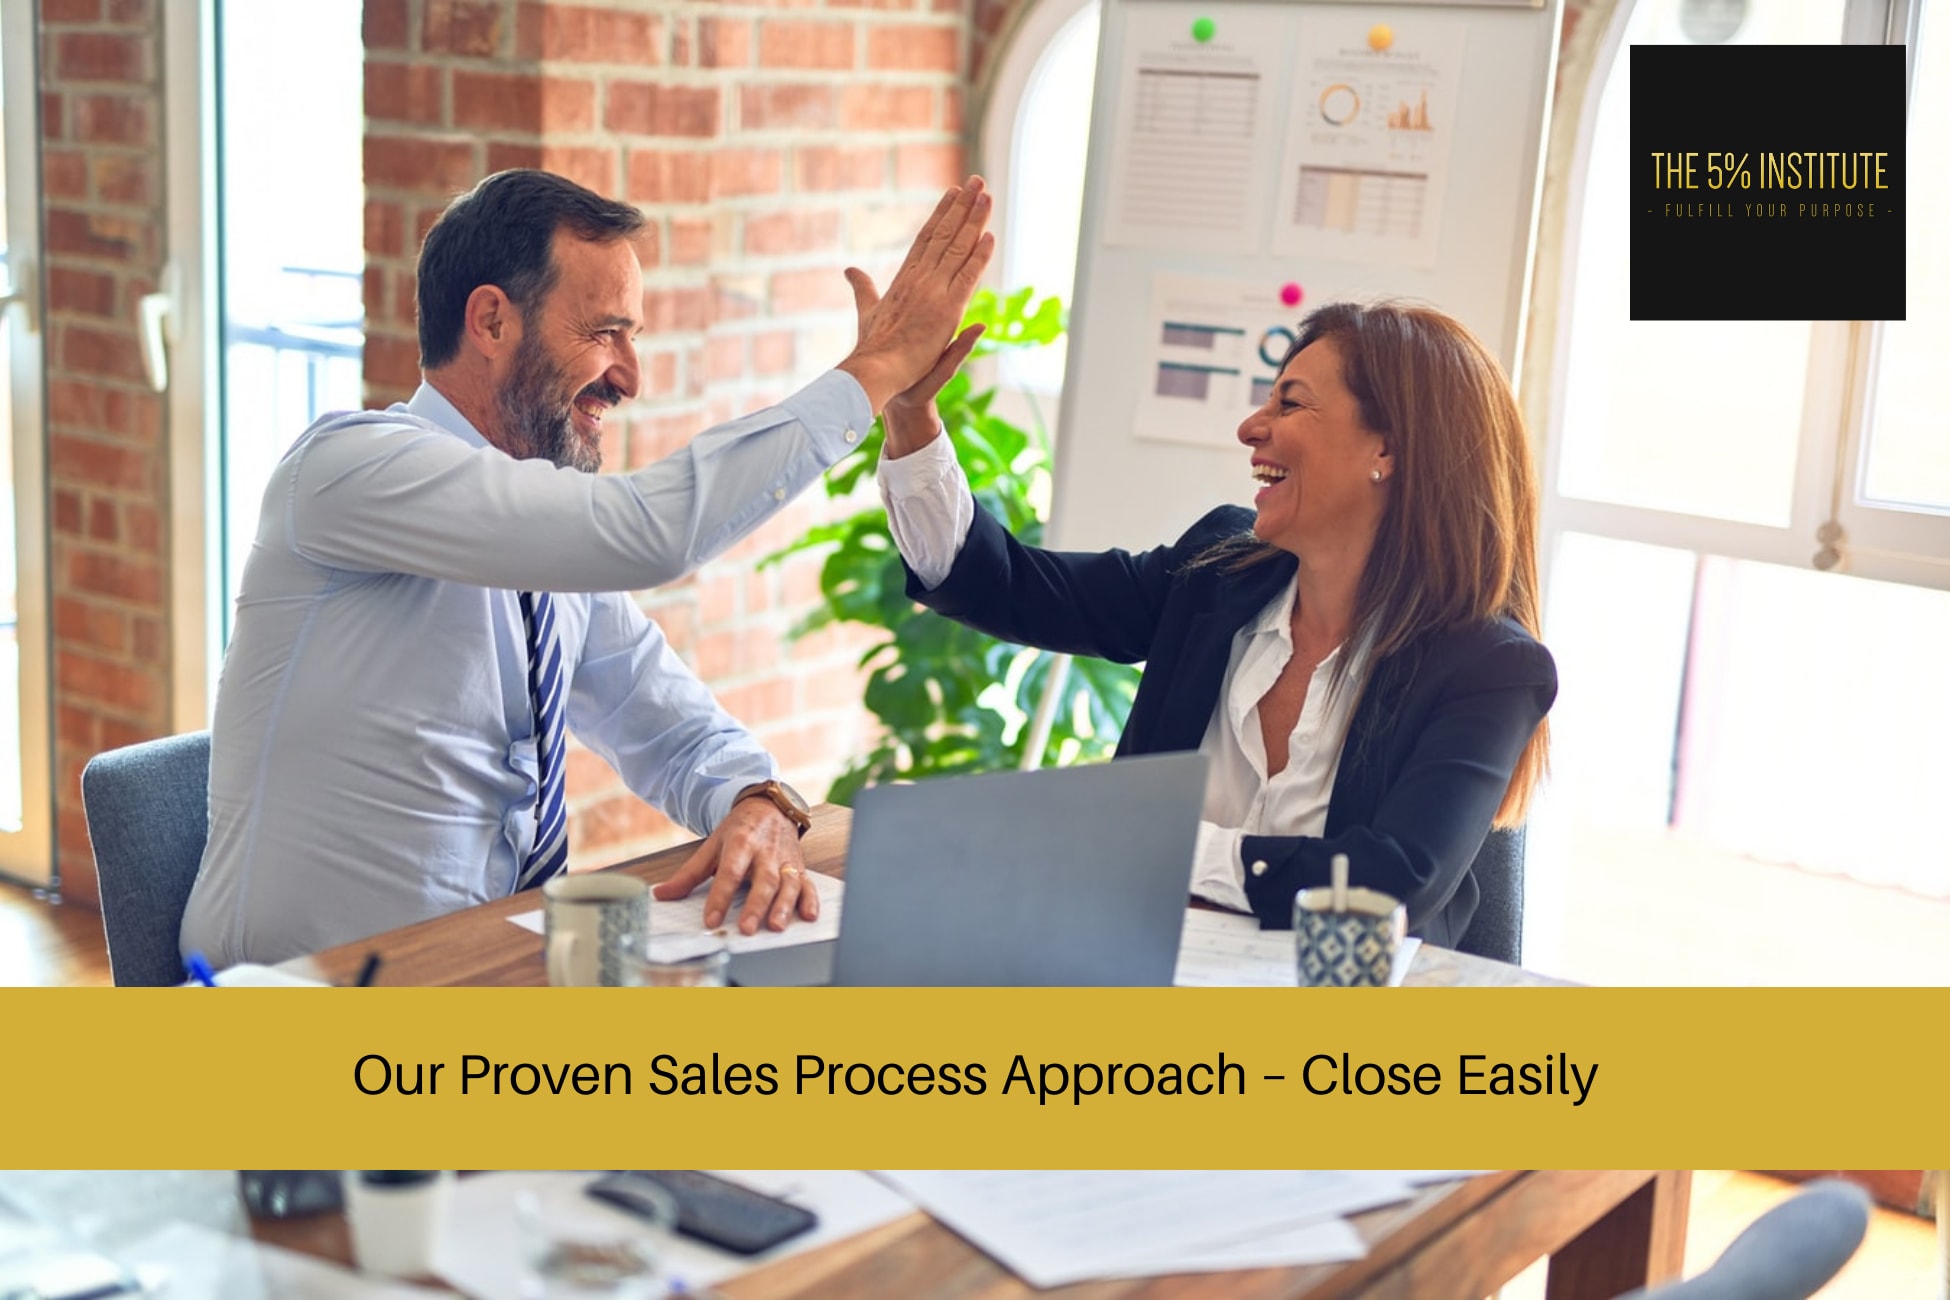 proven sales process approach